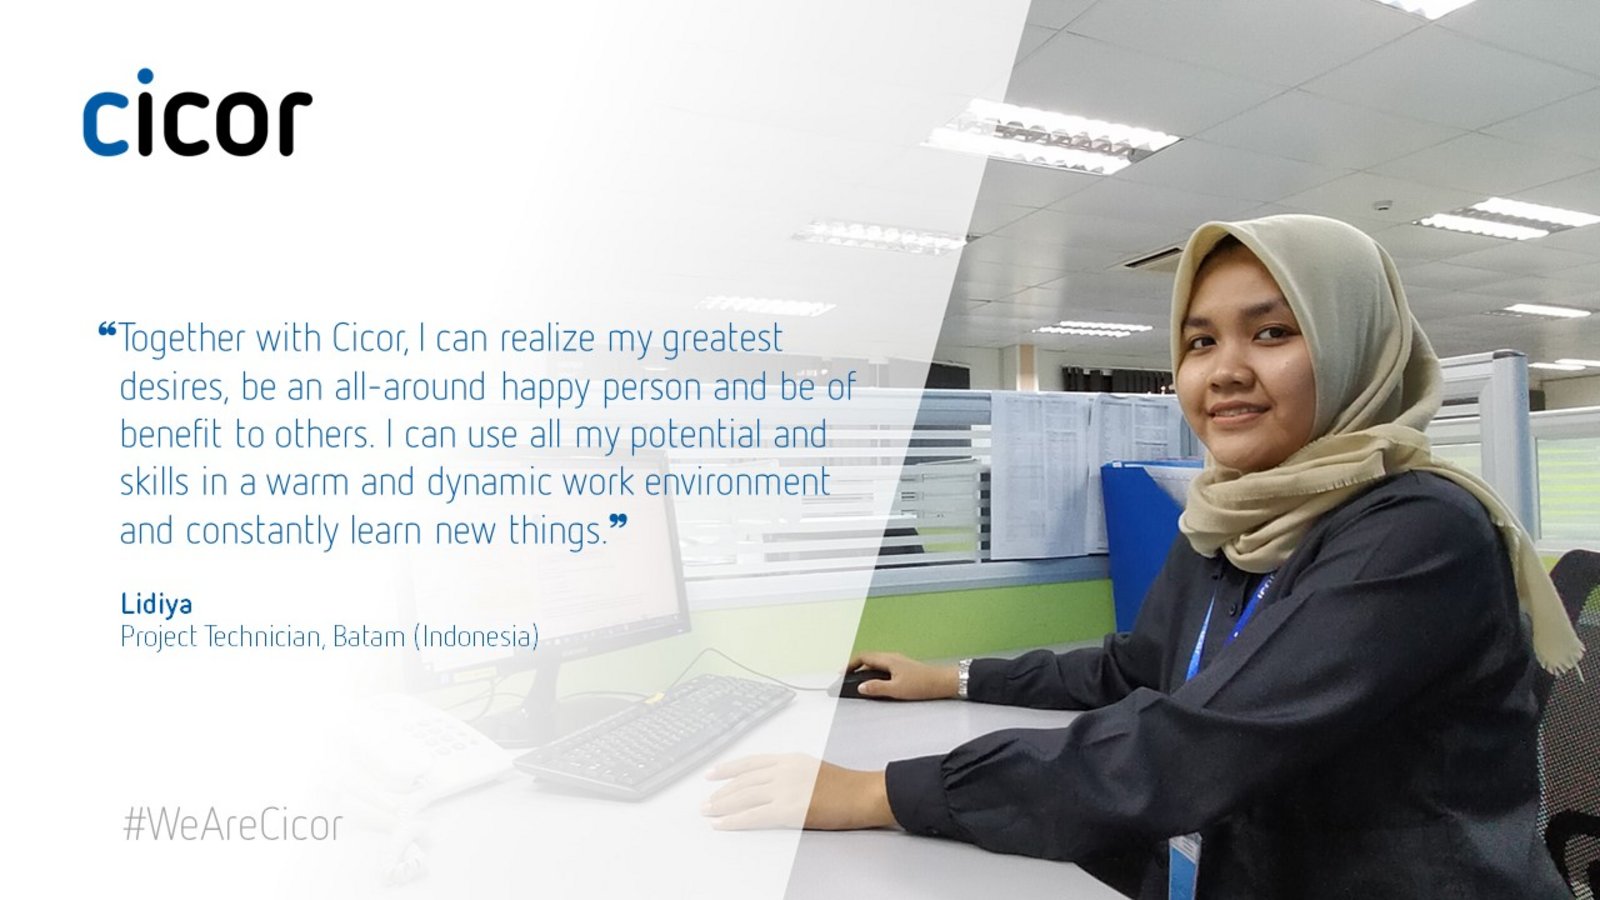 Testimonial of Lidiya who works at the Cicor site in Batam